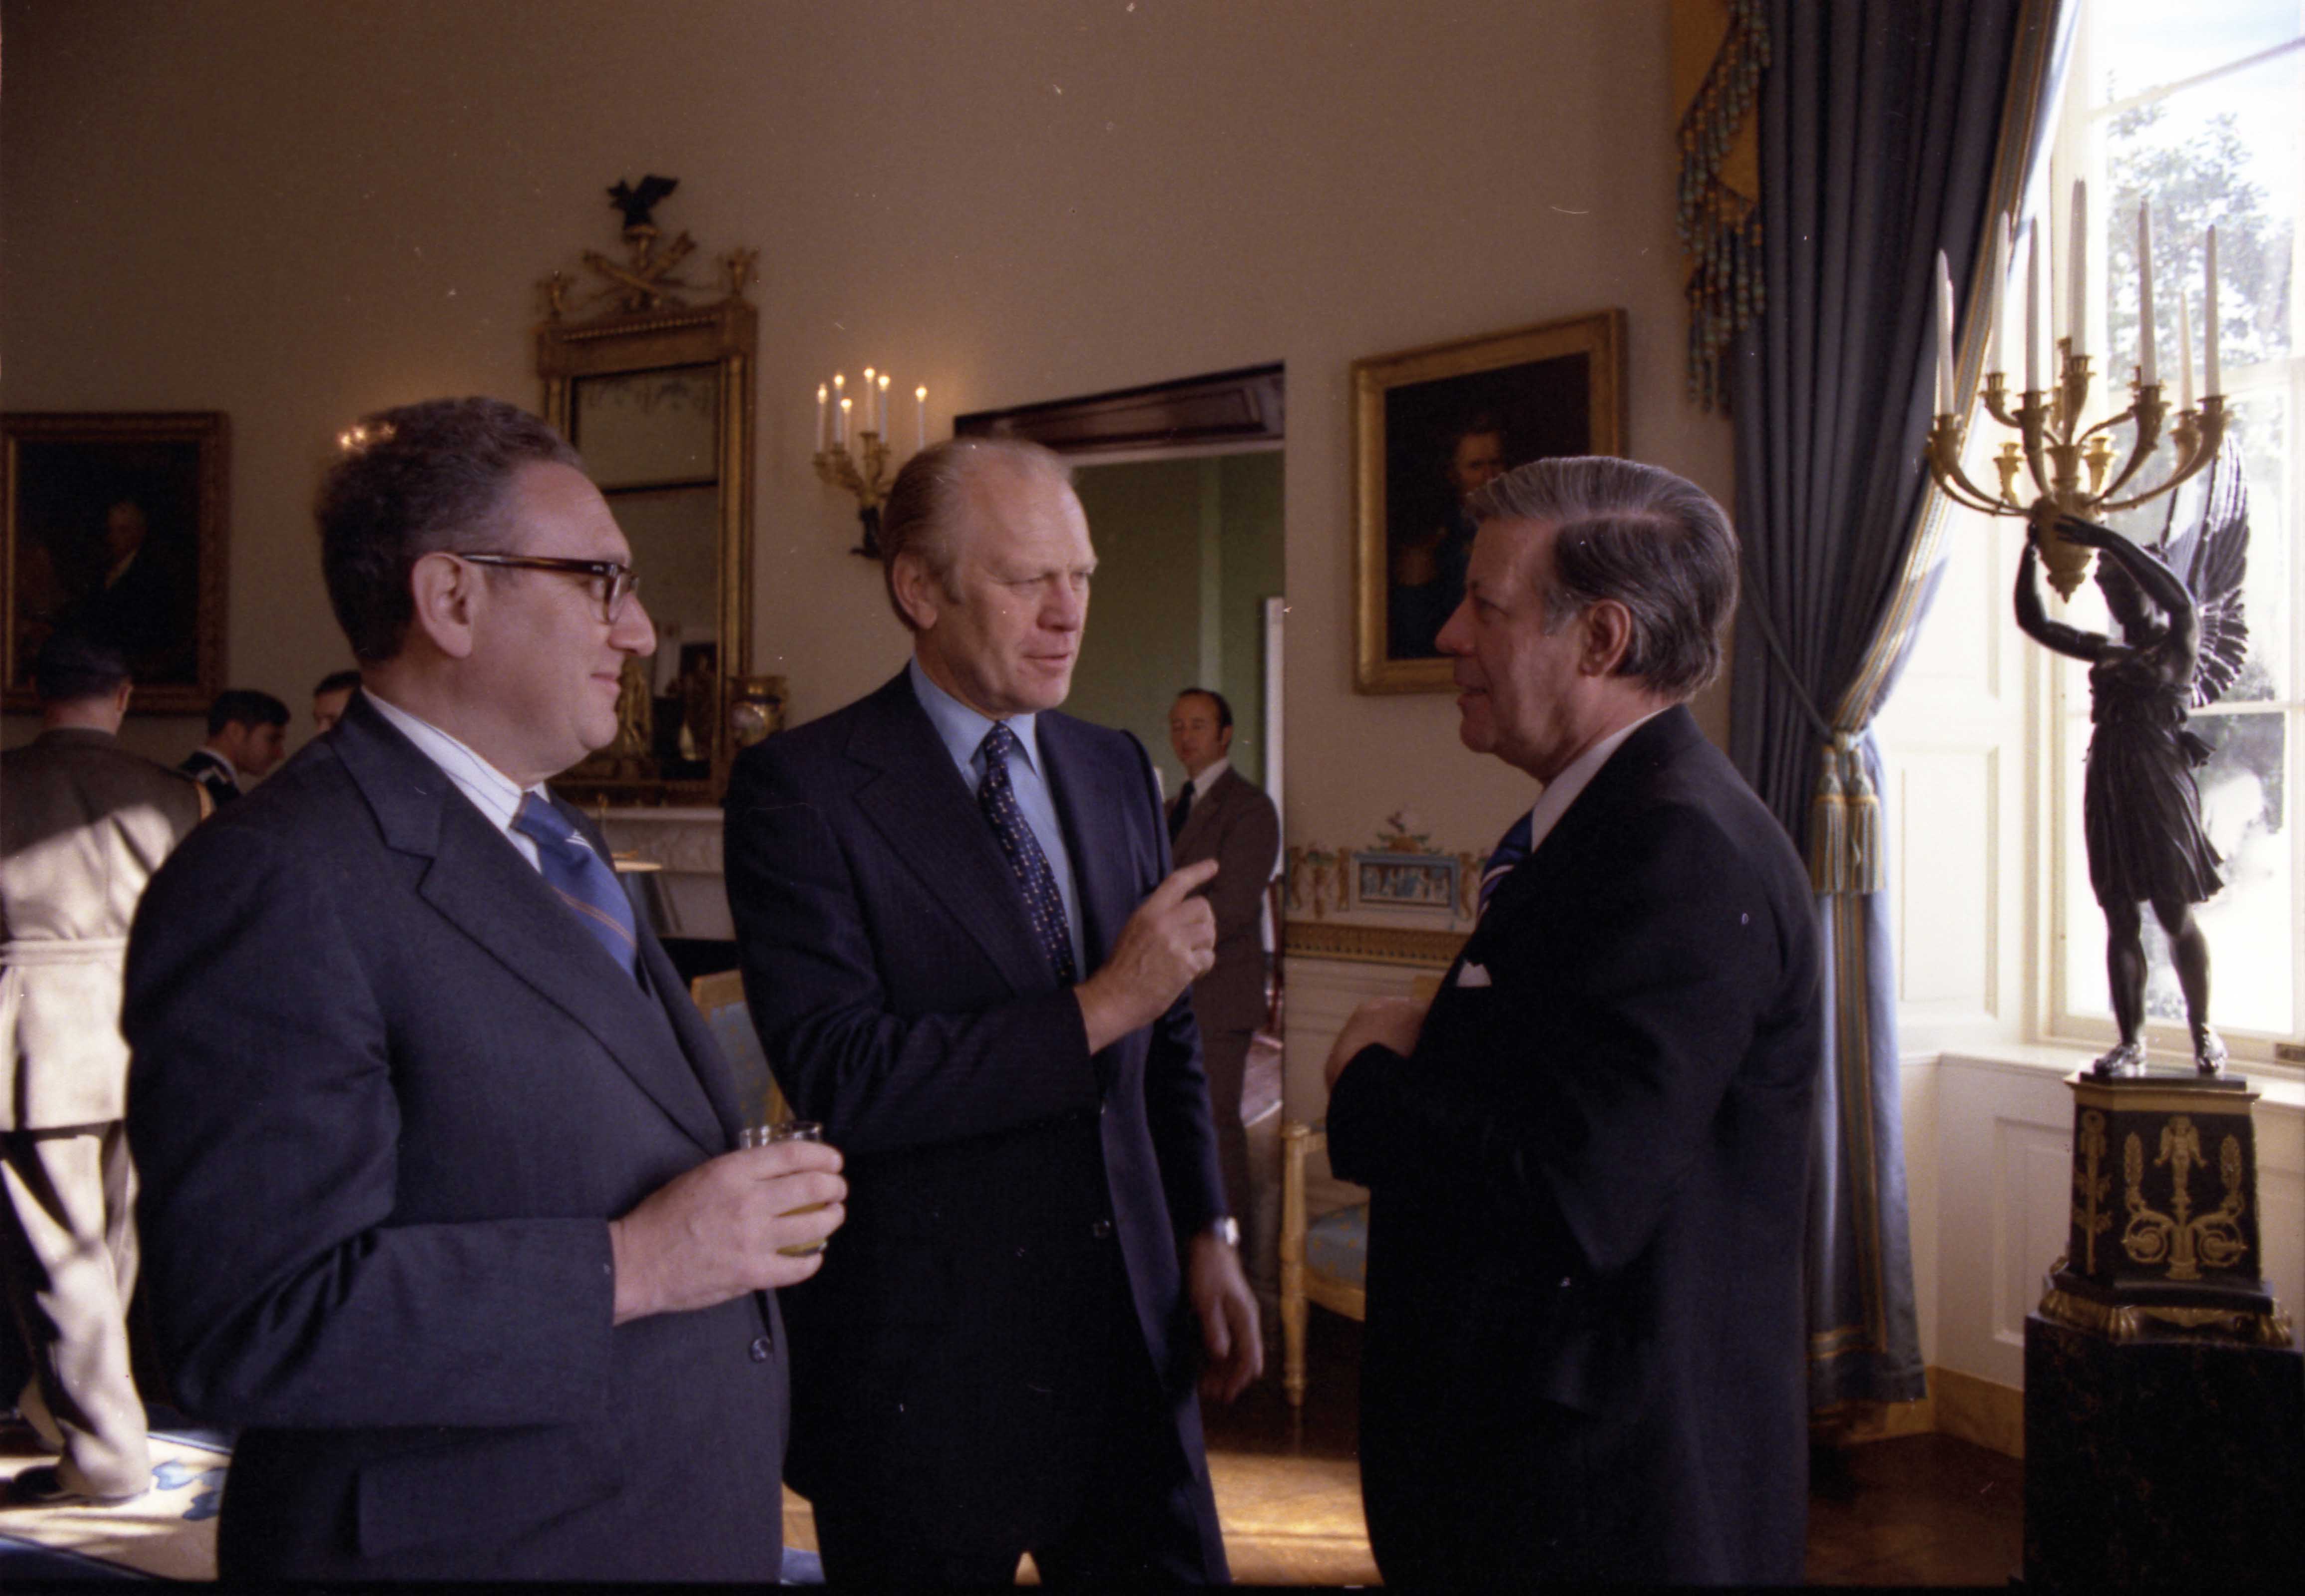 photograph_of_secretary_of_state_henry_kissinger_president_gerald_r._ford_and_chancellor_helmut_schmidt_of_the_federal_republic_of_germany_talking_in_the_blue_room_at_a_reception_following_the_state_arrival_cere..._-_nara_-_7462079.jpg